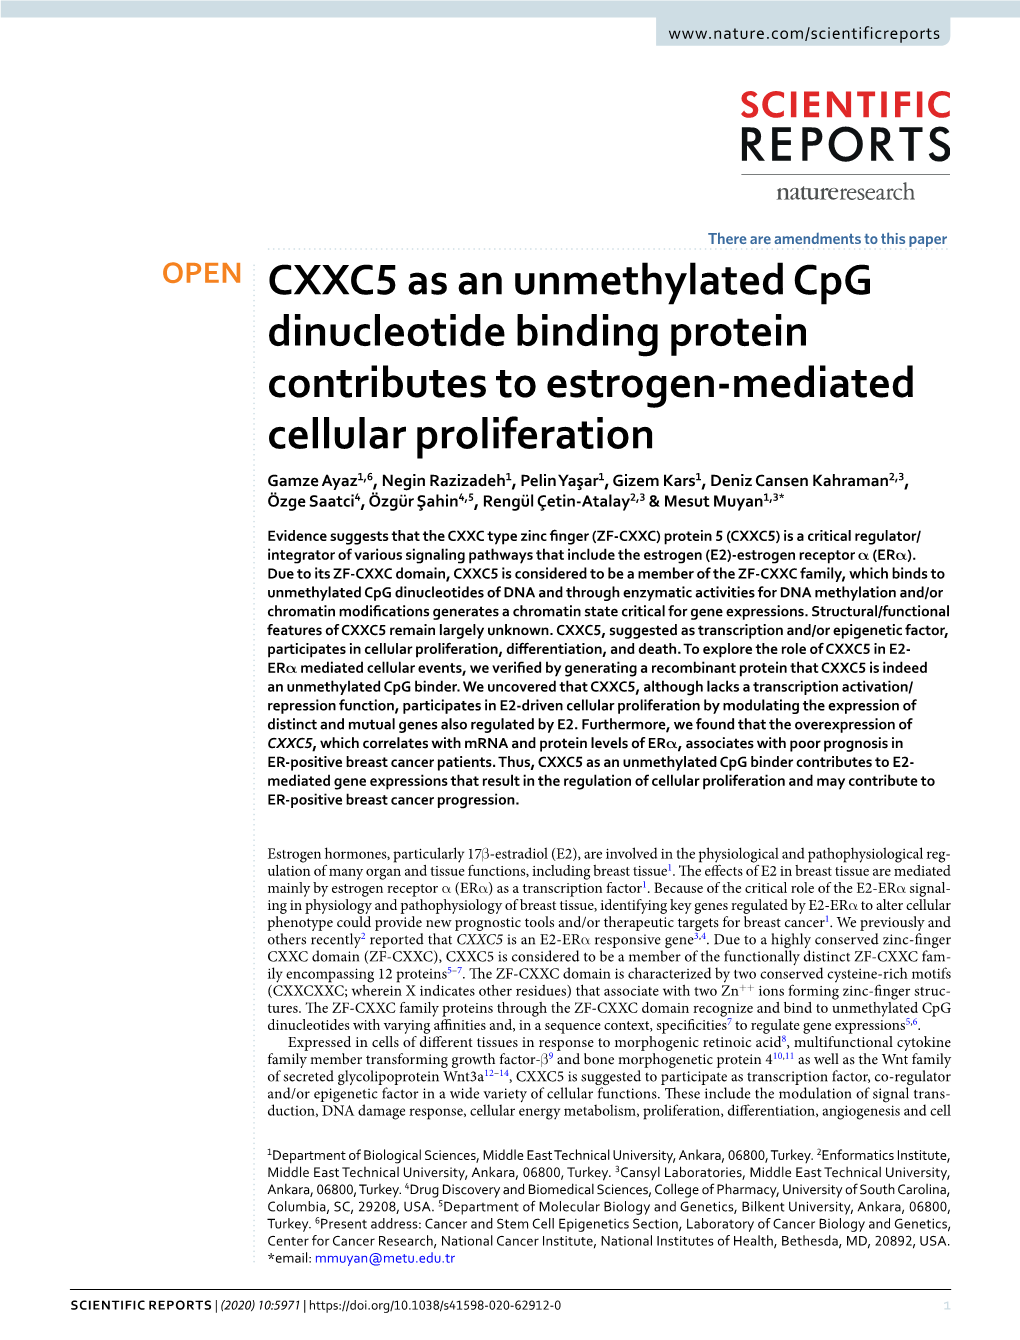 CXXC5 As an Unmethylated Cpg Dinucleotide Binding Protein